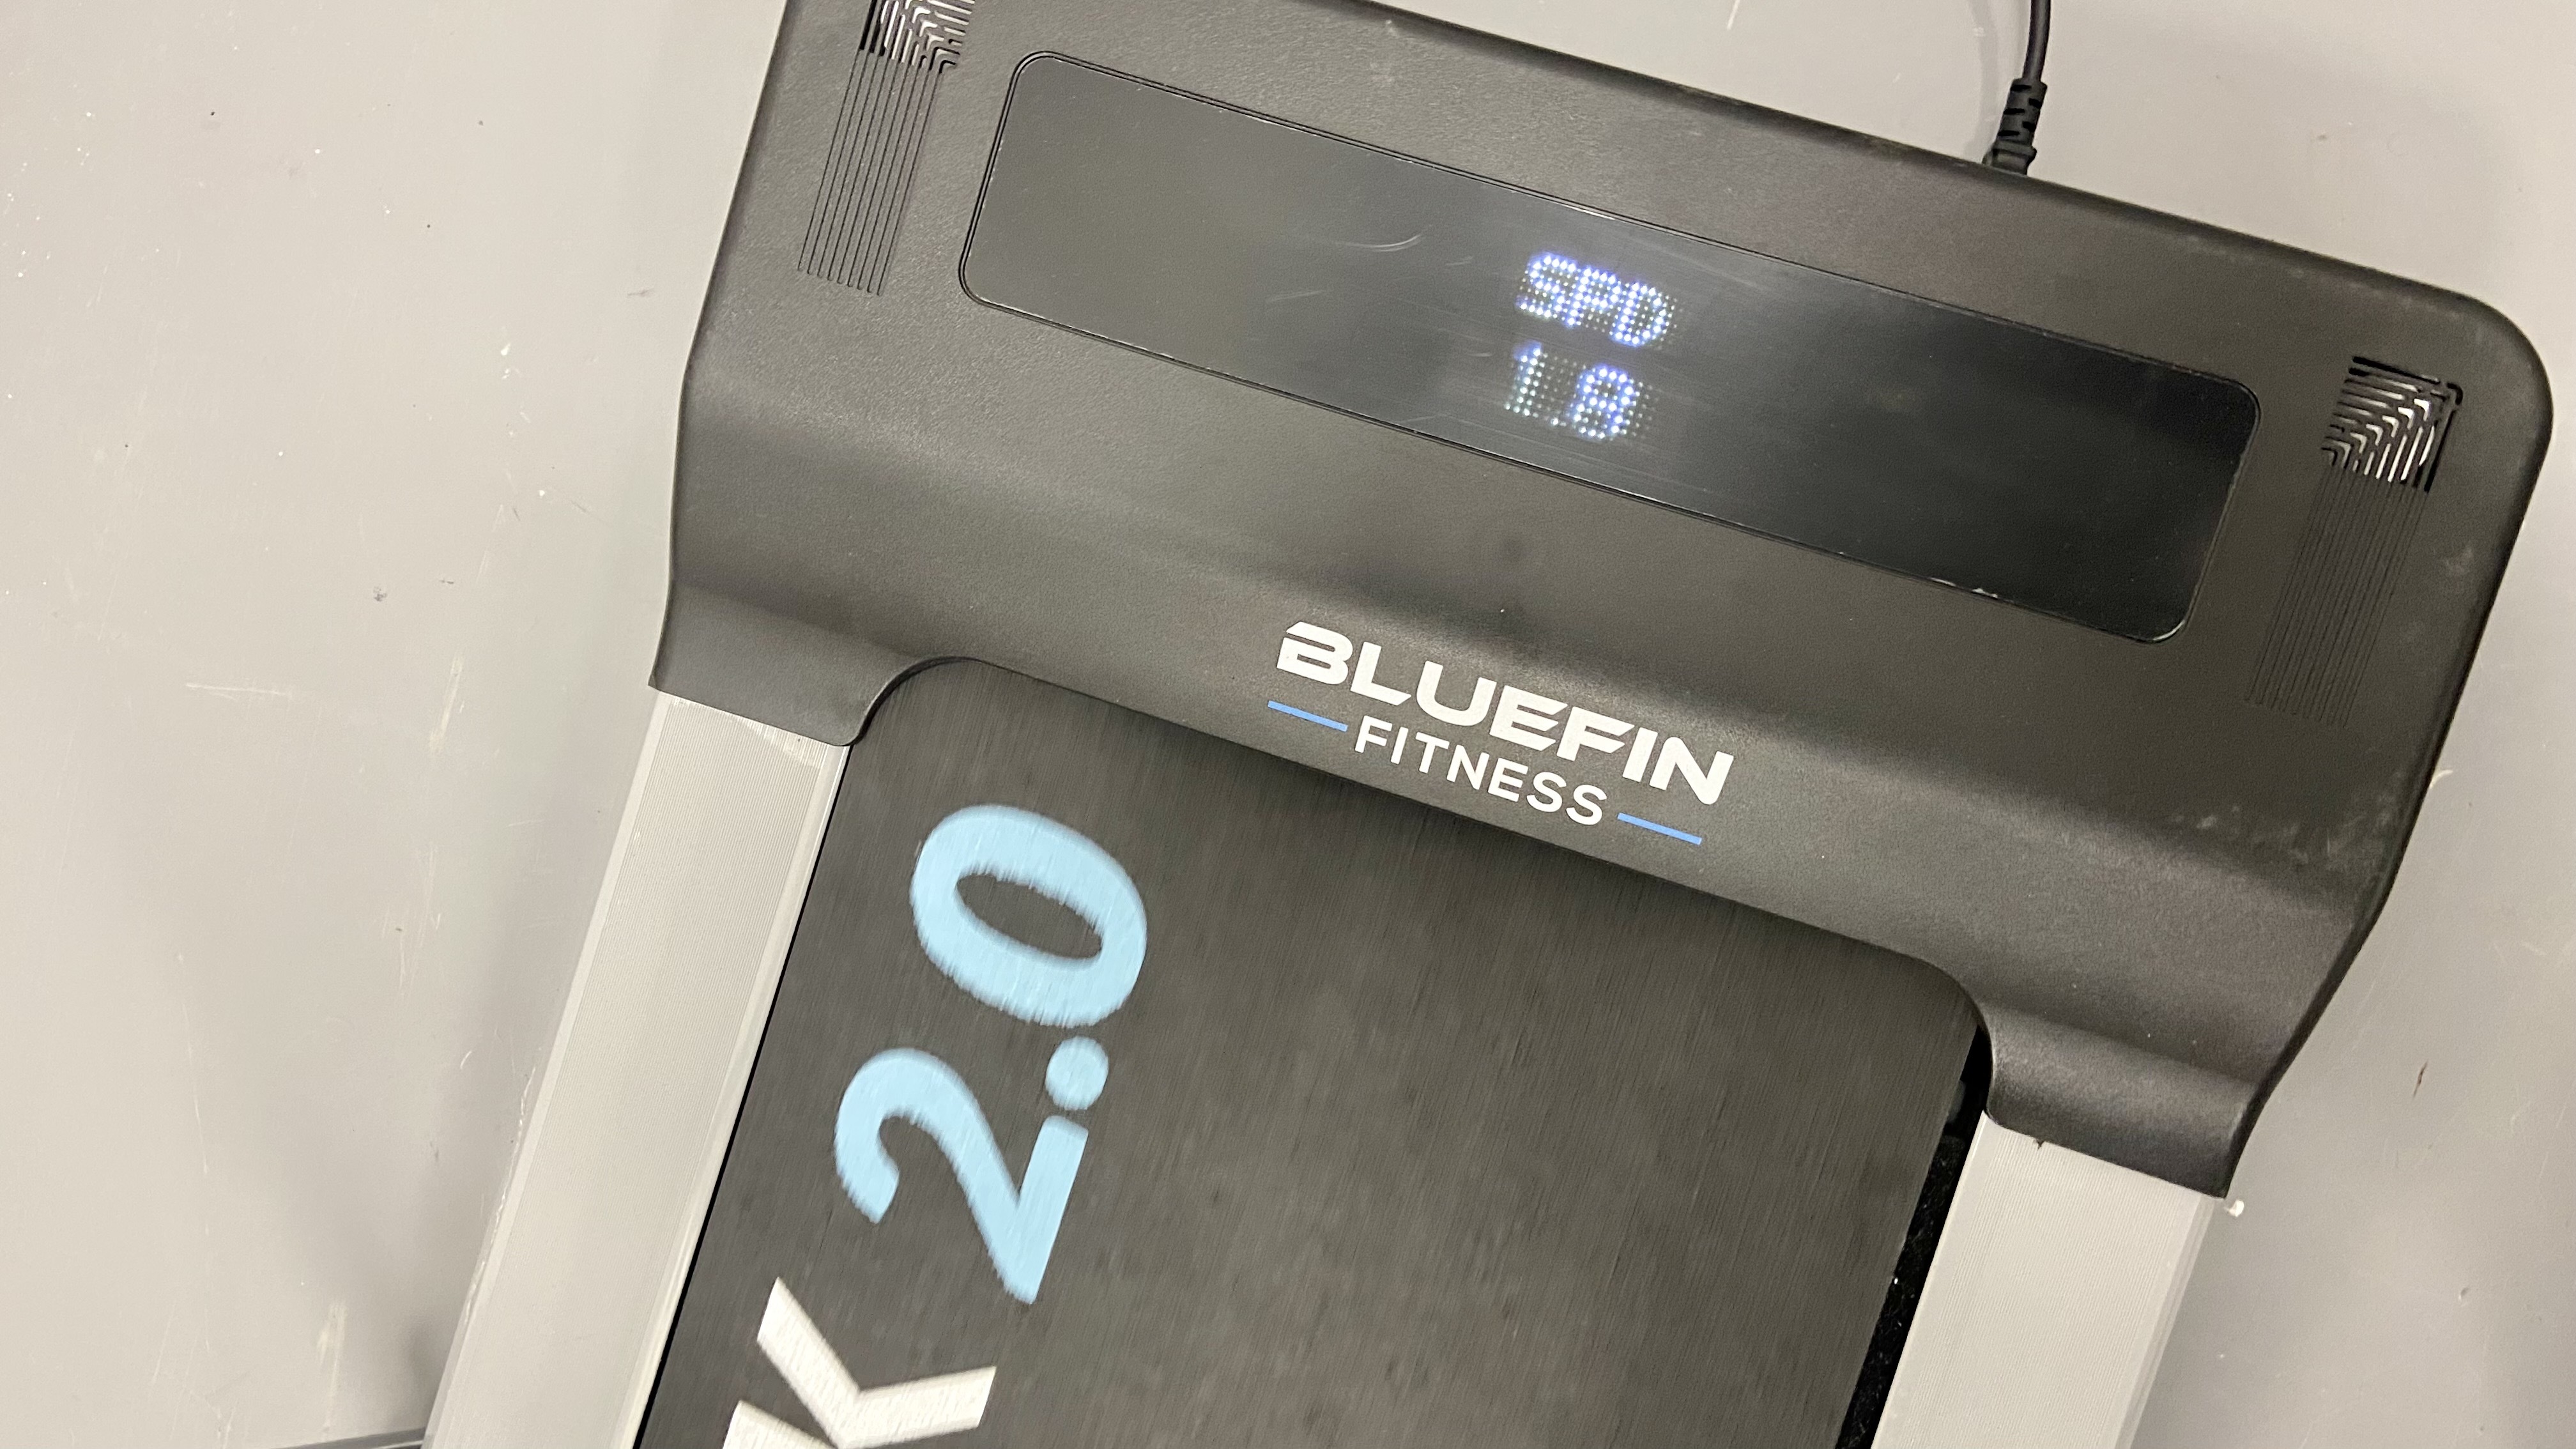 A photo of the Bluefin Fitness Task 2.0 treadmill display